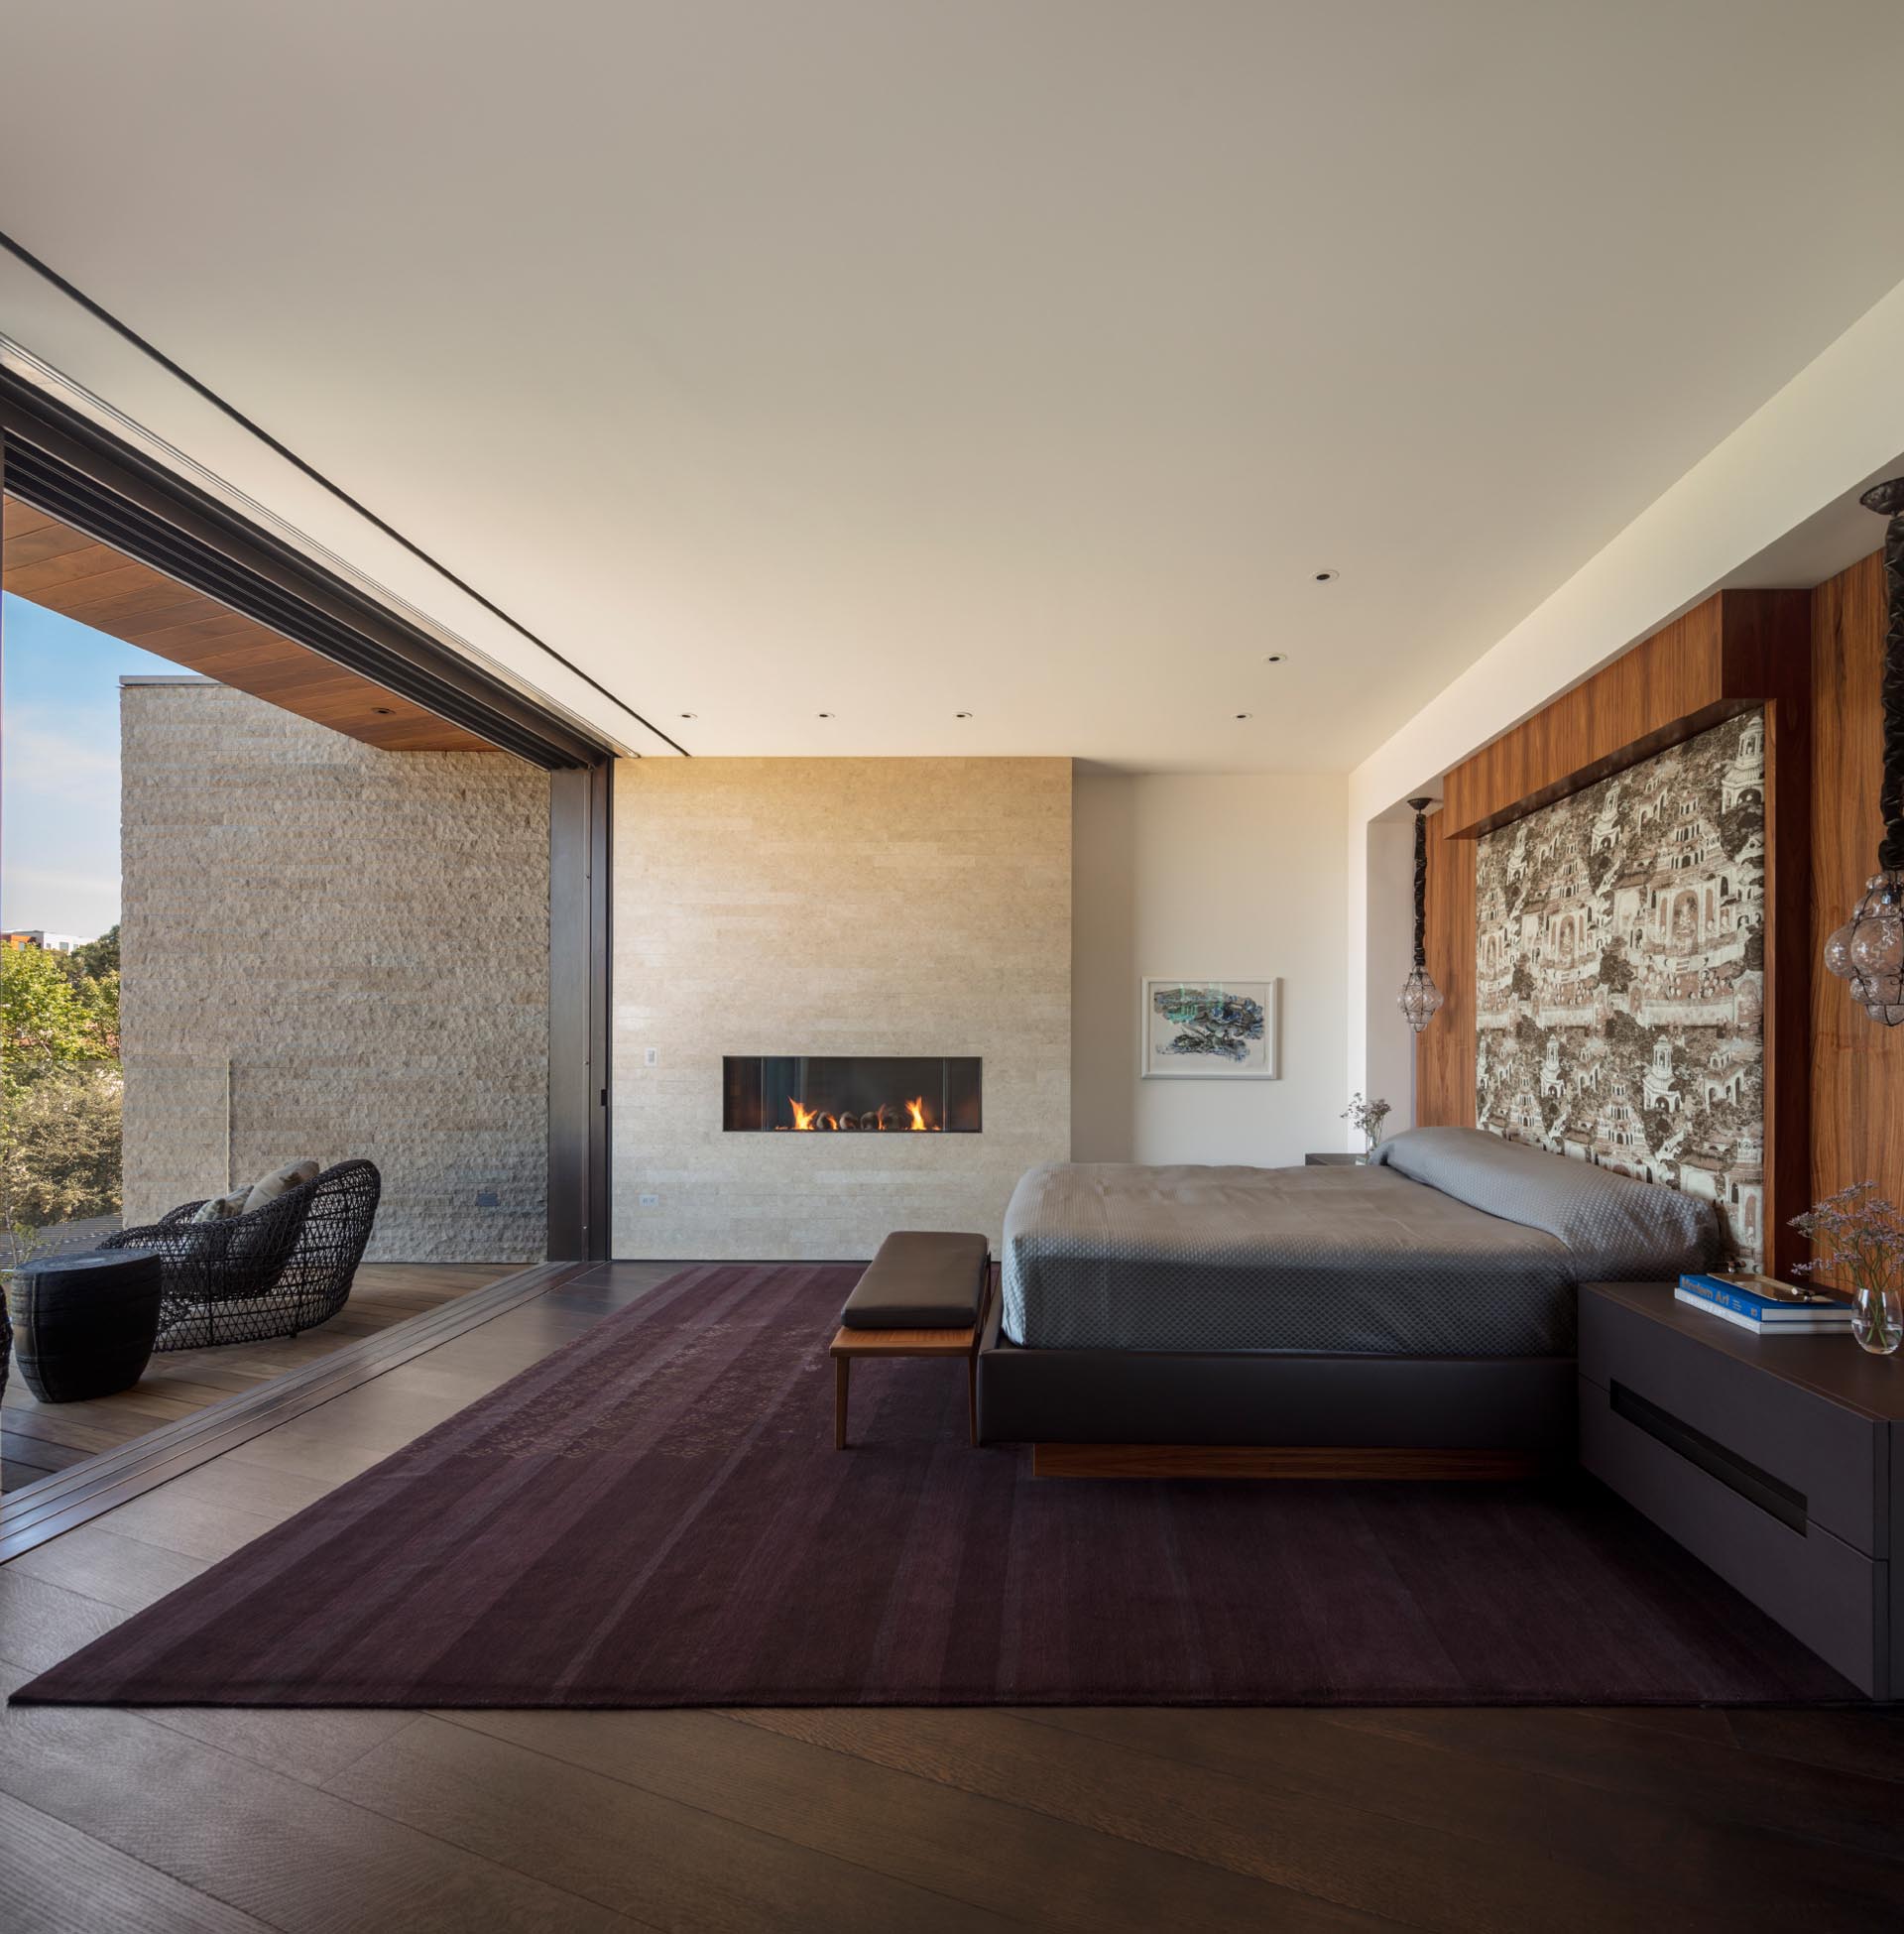 A modern bedroom includes a wood accent wall with an upholstered headboard, a linear fireplace, dark wood floors, and a wall that opens to a deck for views of the valley.